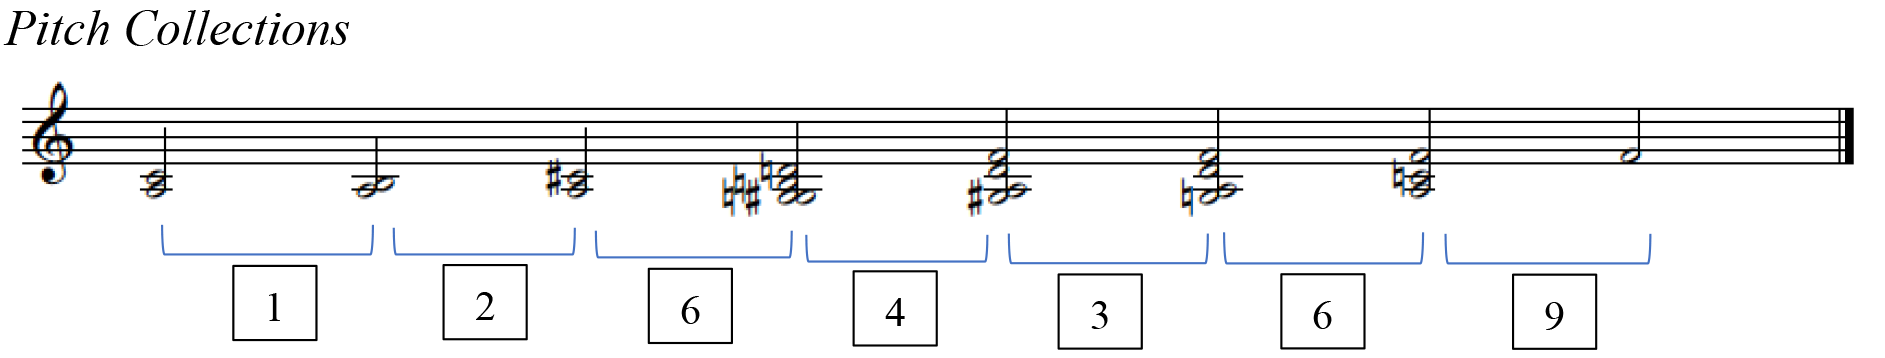 A staff labeled Pitch Collections with a treble clef containing notes and corresponding numbers between them.